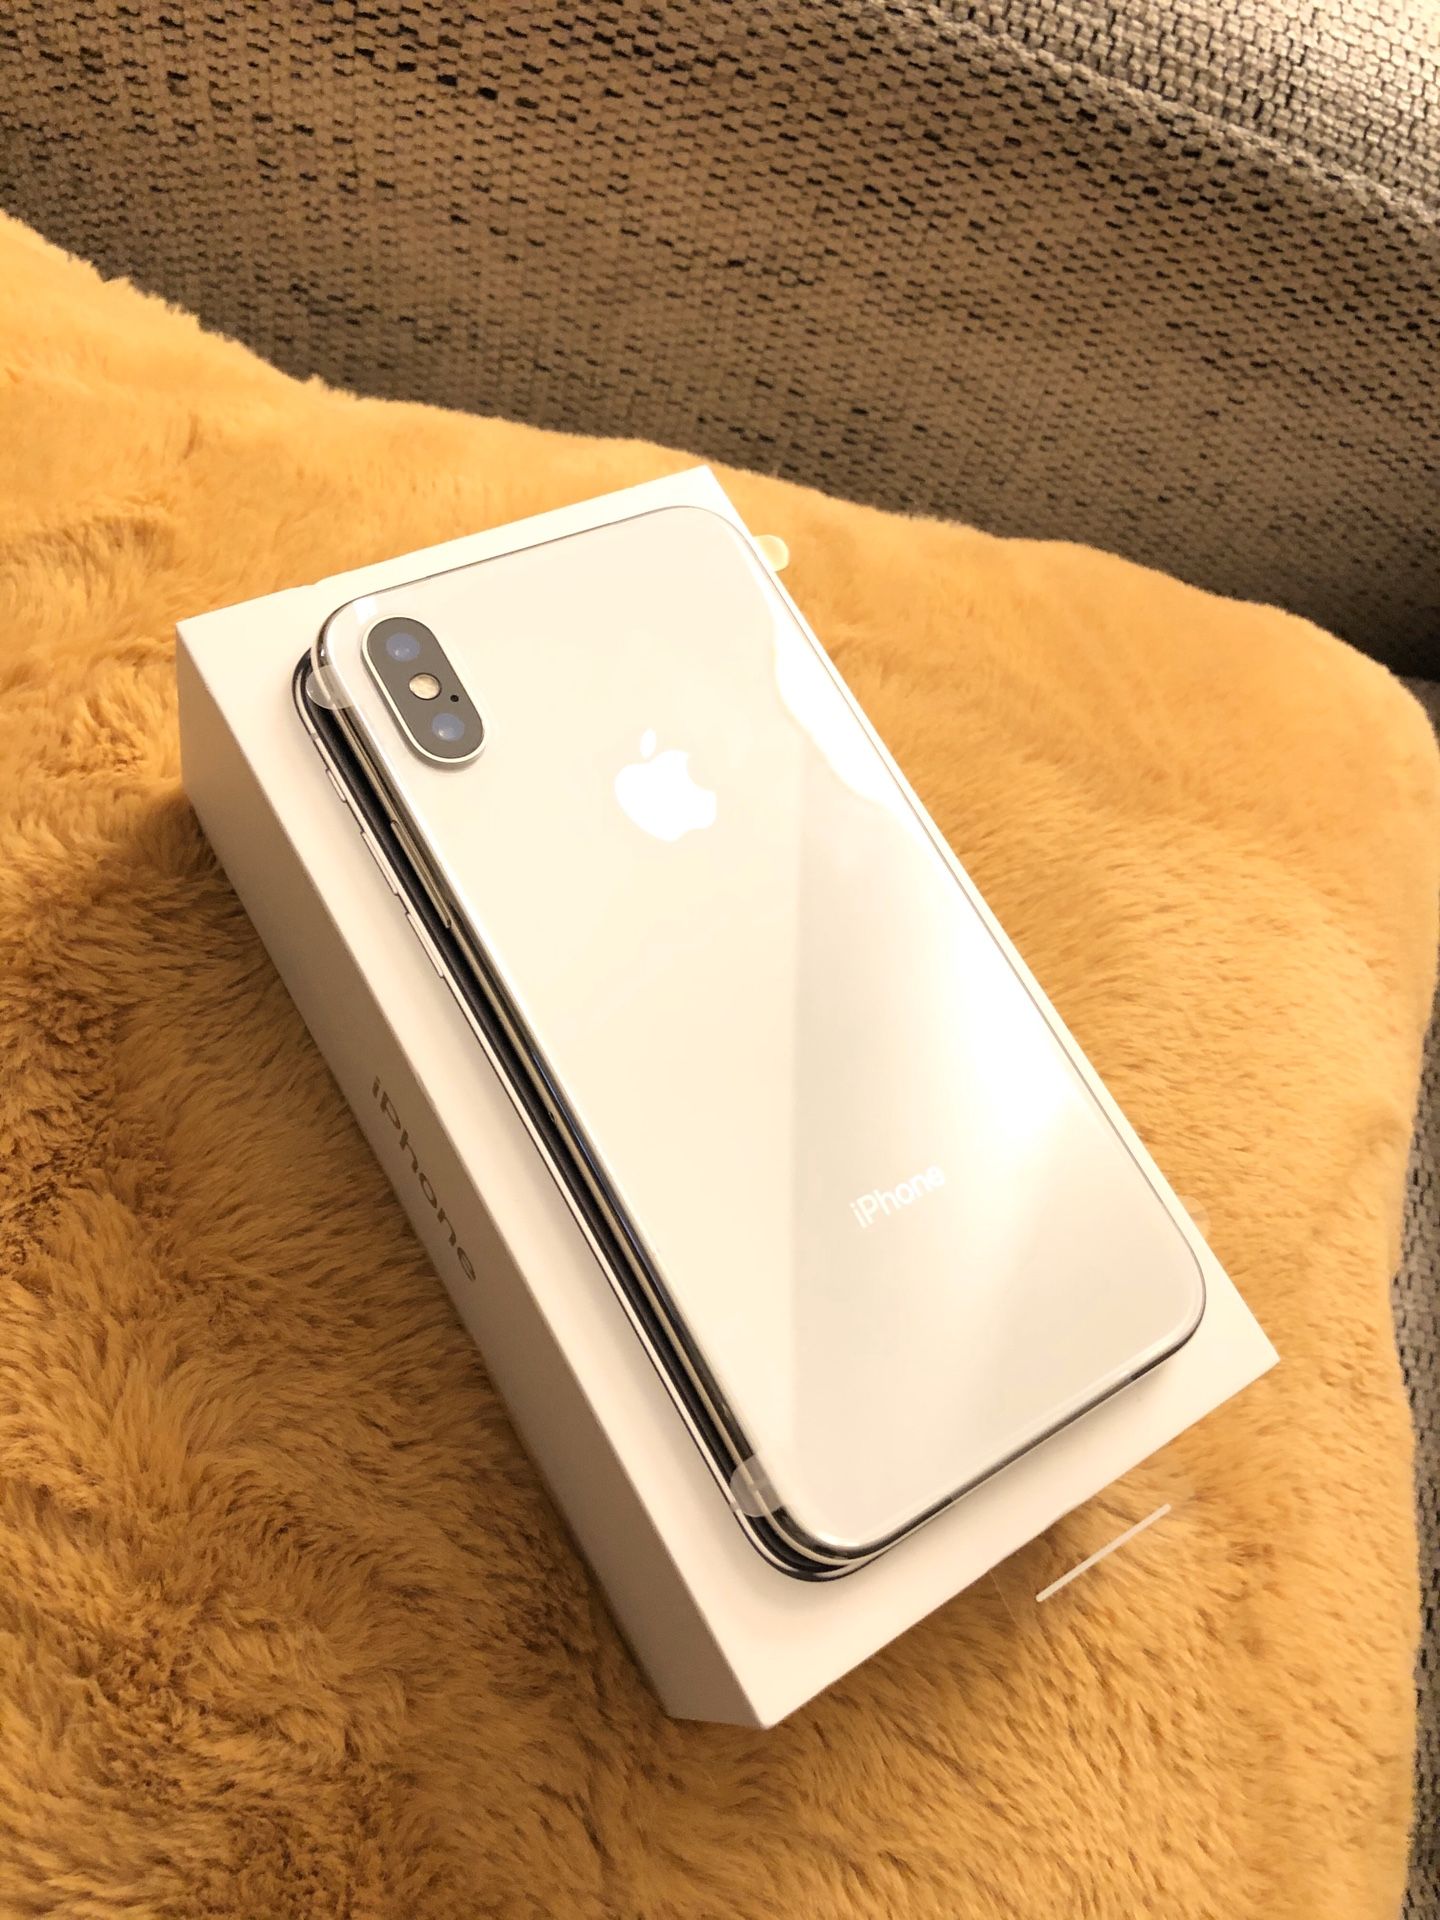 UNLOCKED - iPhone X - 256 GB - $575 OBO - needs to go by 11/18